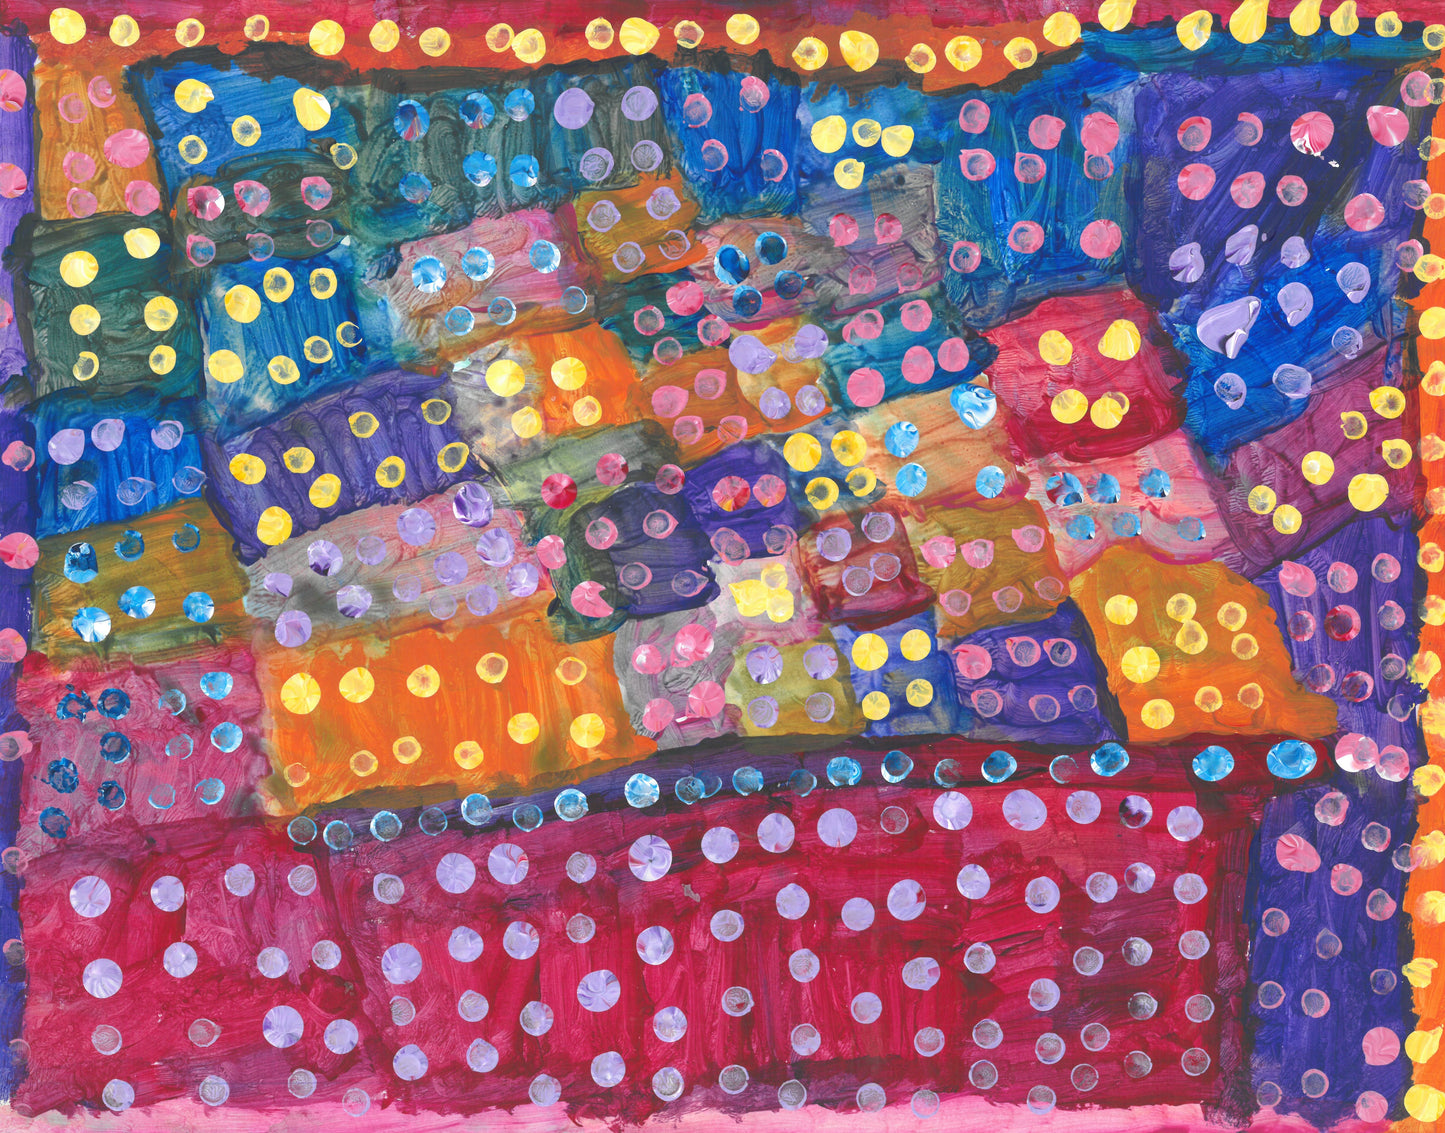 This is a multicolored painting with several boxes of colors including red, orange, blue, purple and yellow. There are multicolored dots covering the page